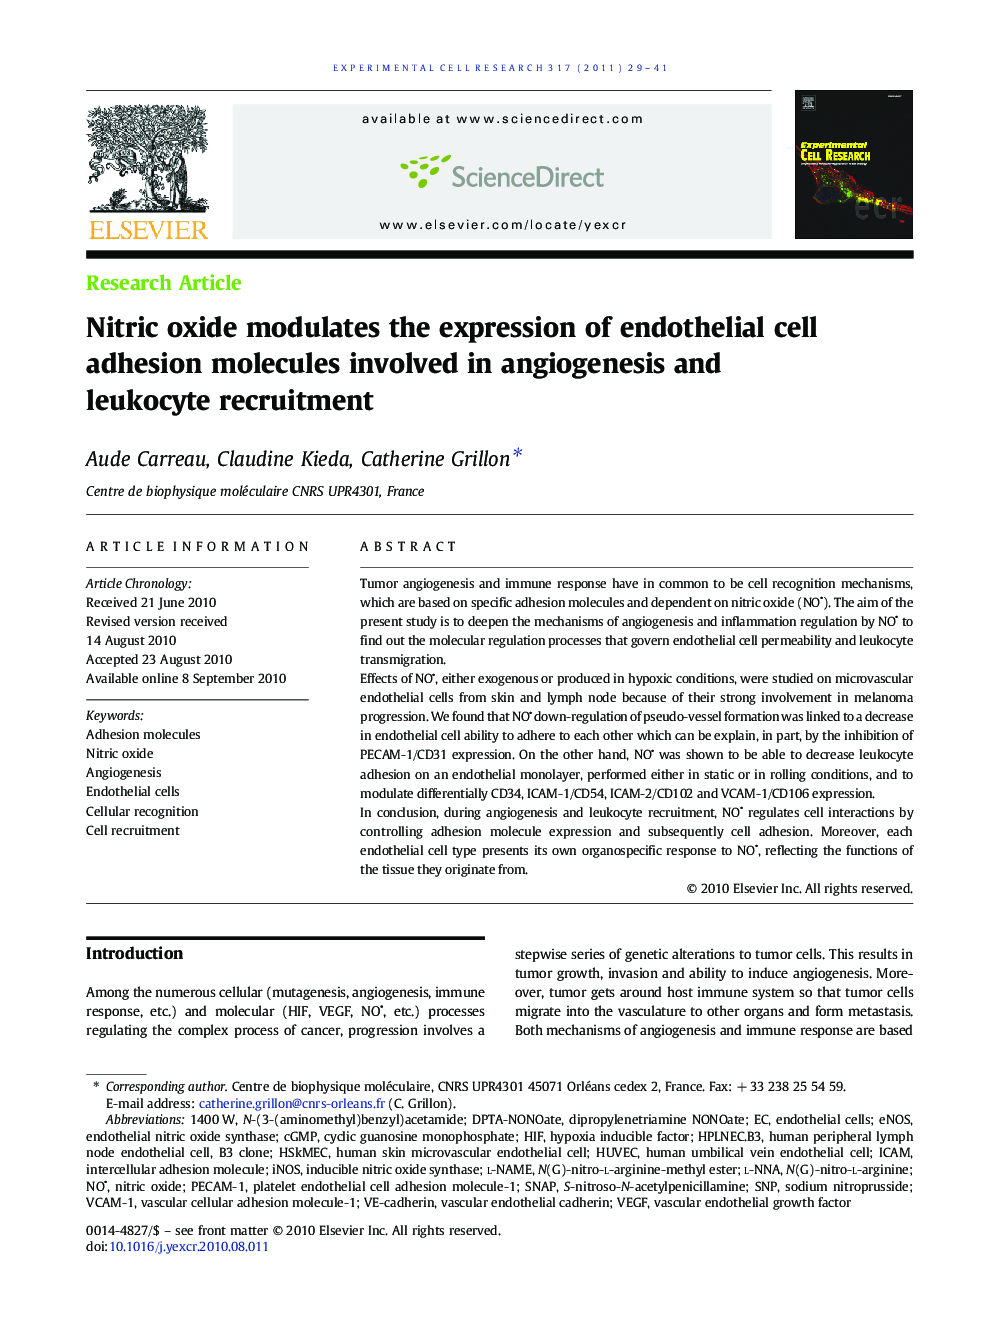 Nitric oxide modulates the expression of endothelial cell adhesion molecules involved in angiogenesis and leukocyte recruitment